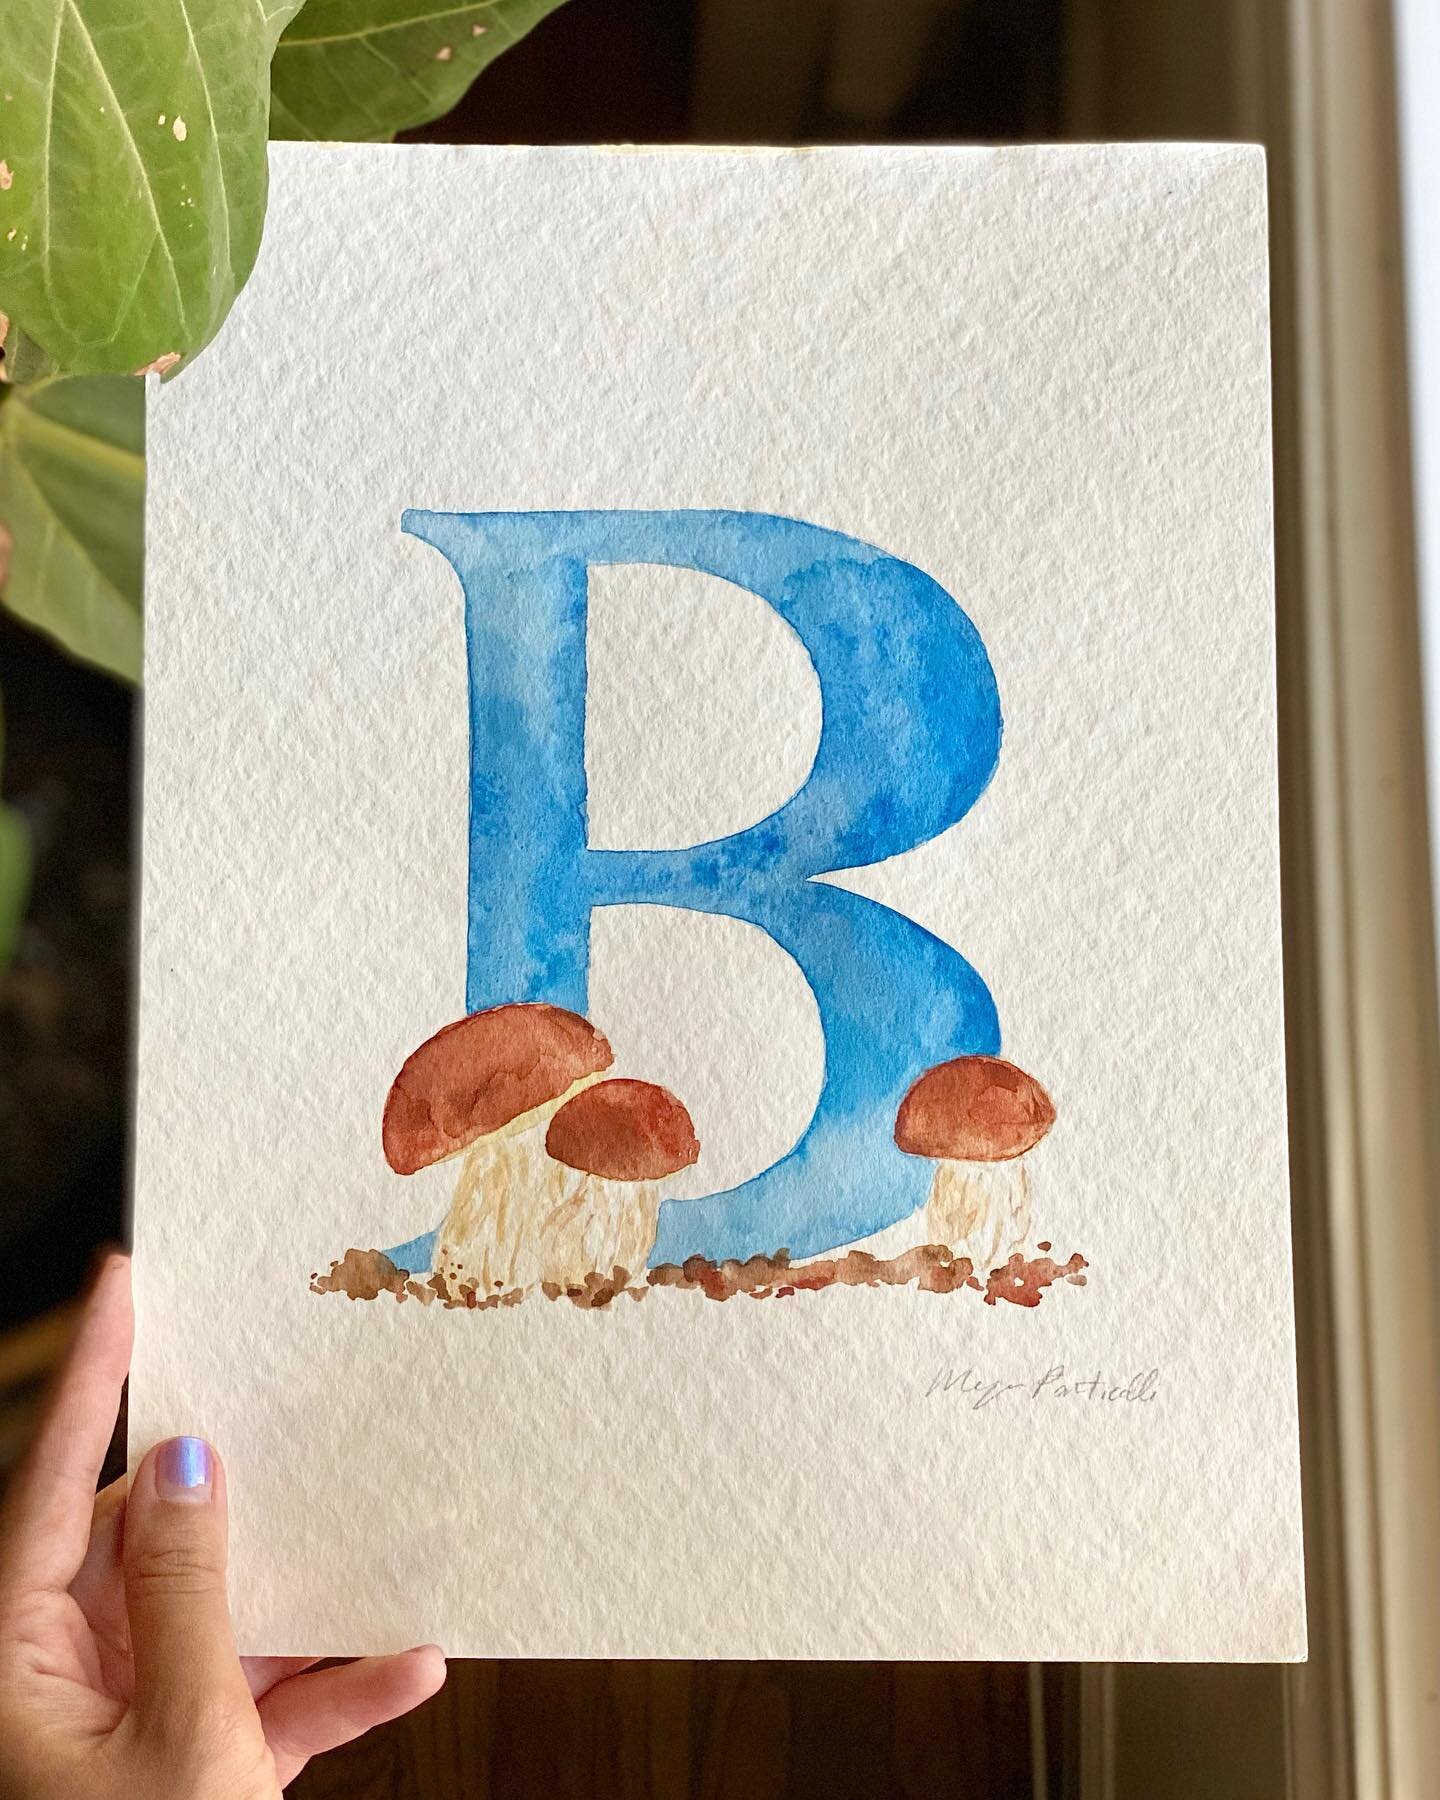 I love it so much! Little Bebe Boletes are the perfect touch for this monogram&hellip; and I am obsessed. Do I need to make more?&hellip; so many letters left in the alphabet, right @secretlifeofbledsoes ? 🤩 Happy weekend! 🌲💙🍄
.
.
.
.
.
.
.

#wat